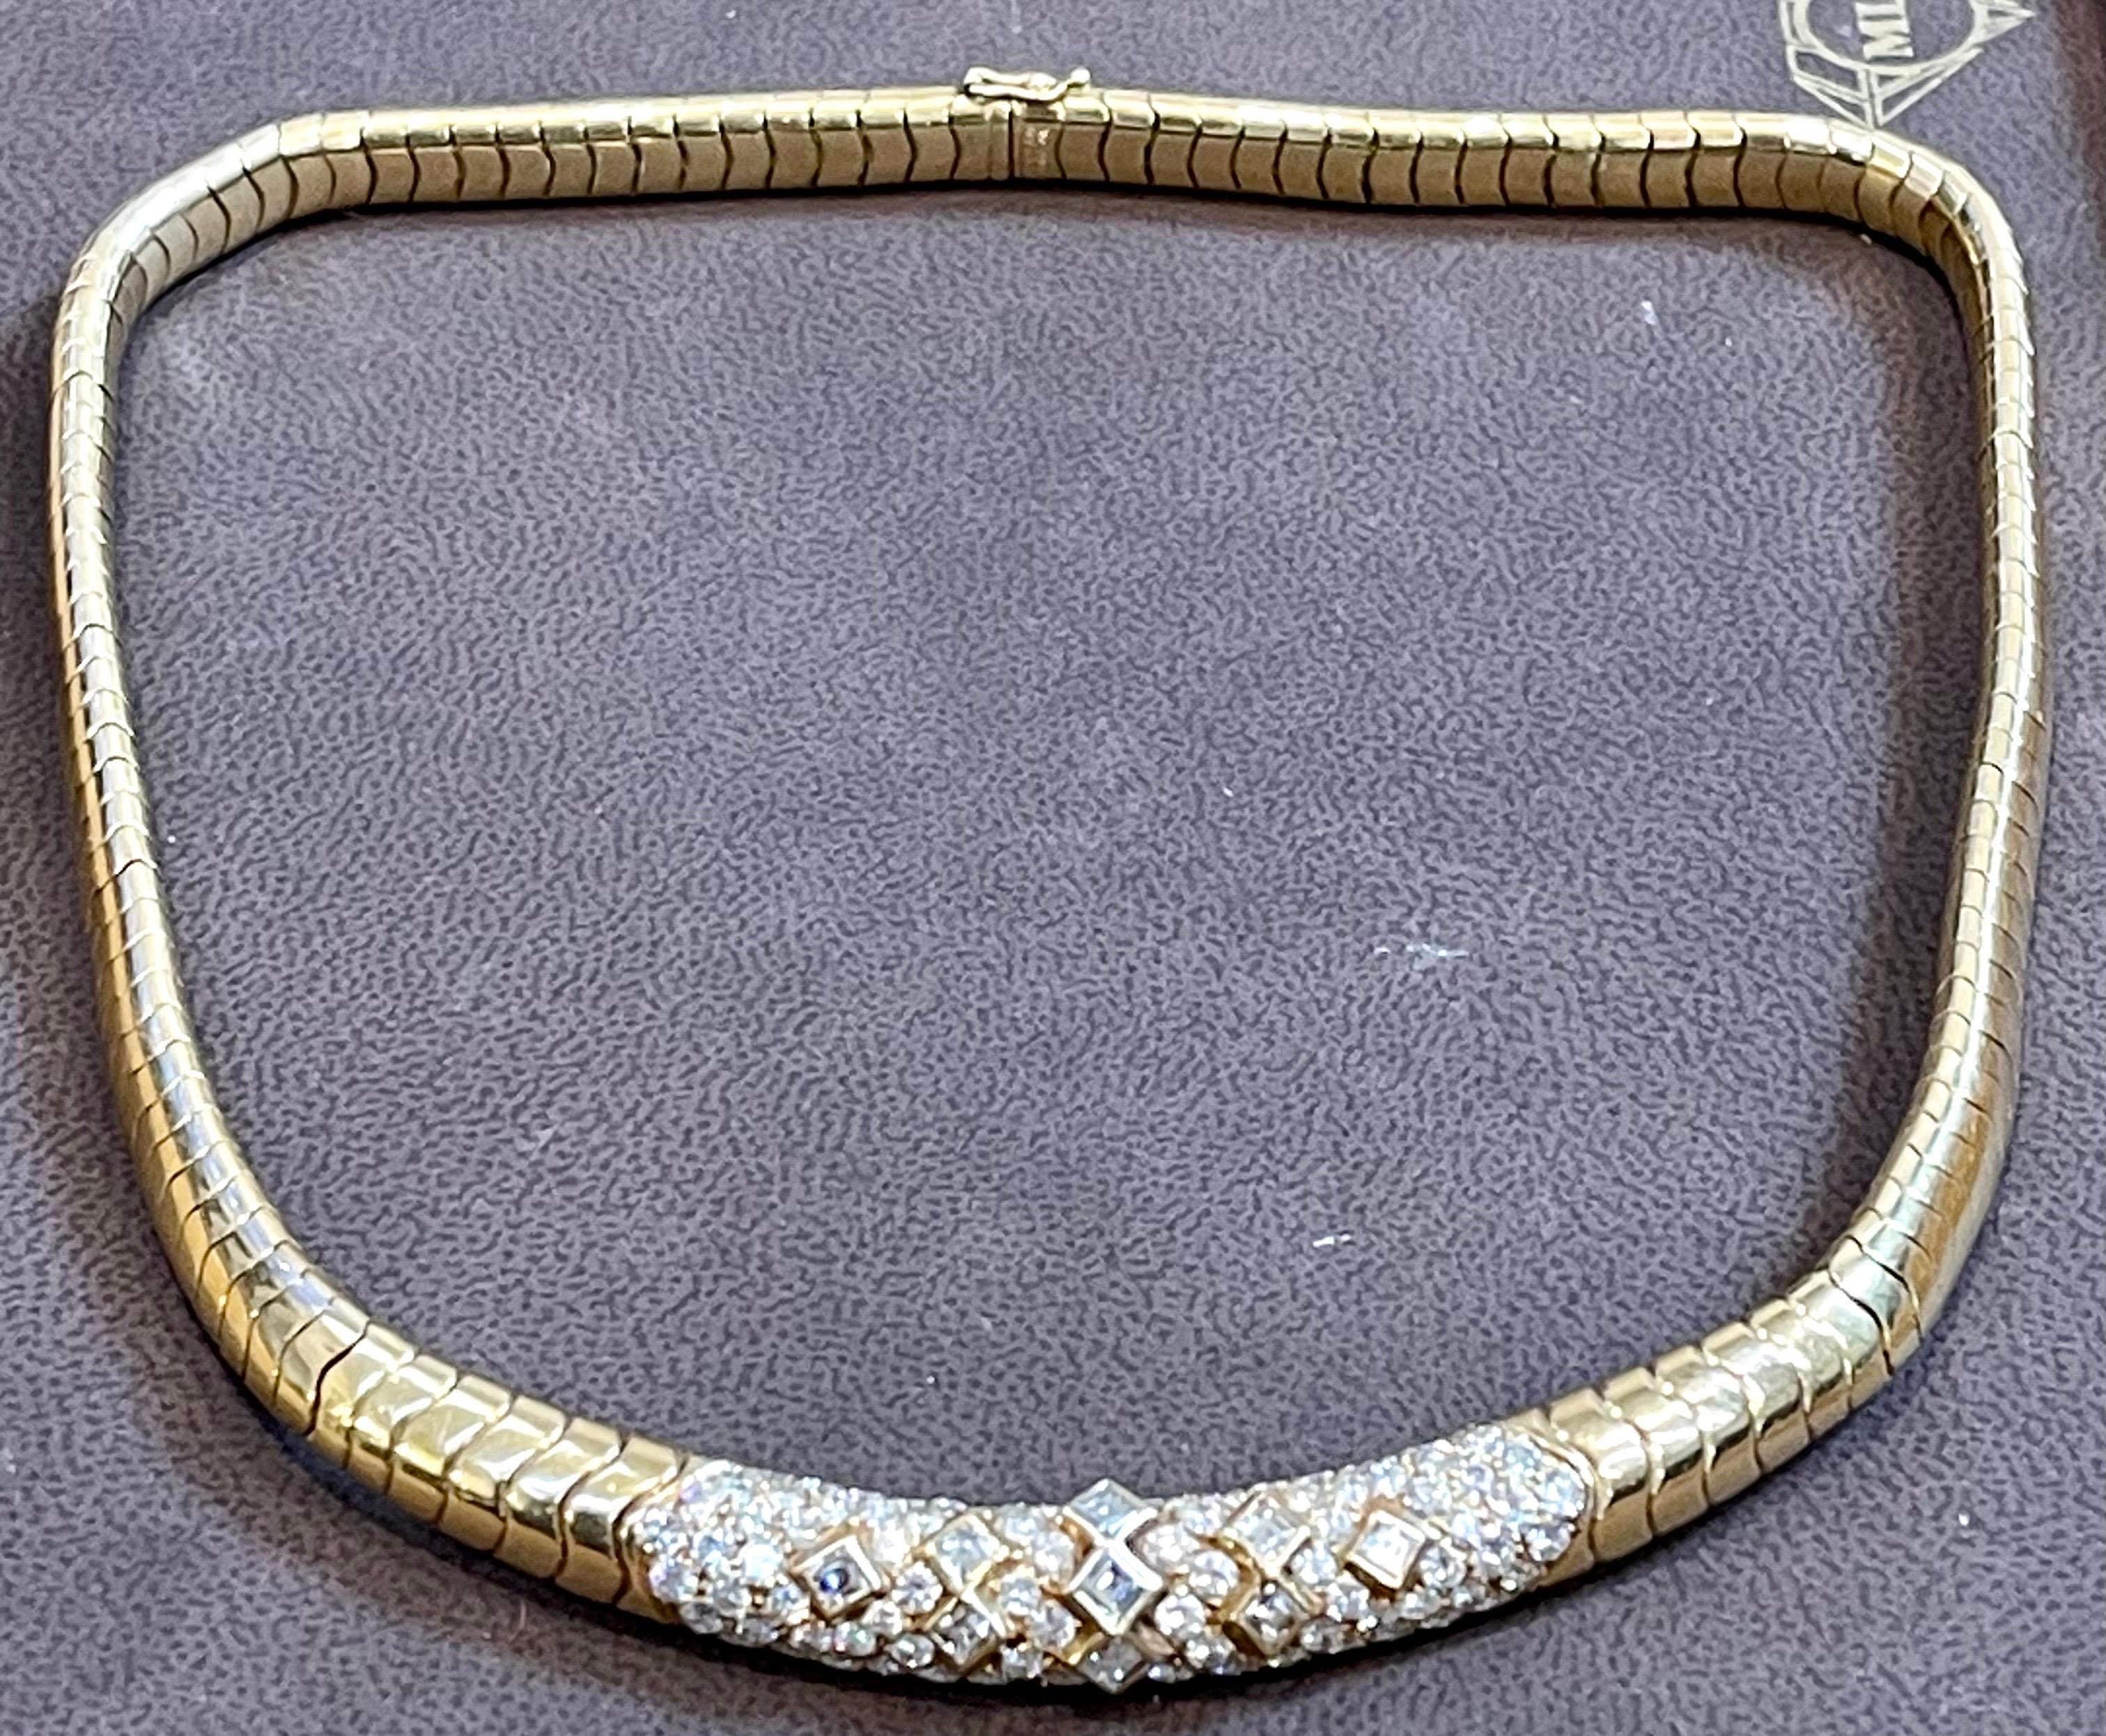 A prestigious piece by Van Cleef & Arpels, this flexible collar necklace is pavé set with an opulence of white diamonds, weighing approximately 5.6 carats ,  all finely mounted in 18 karat yellow gold. weight of the necklace is 115 gm.
Center Plaque